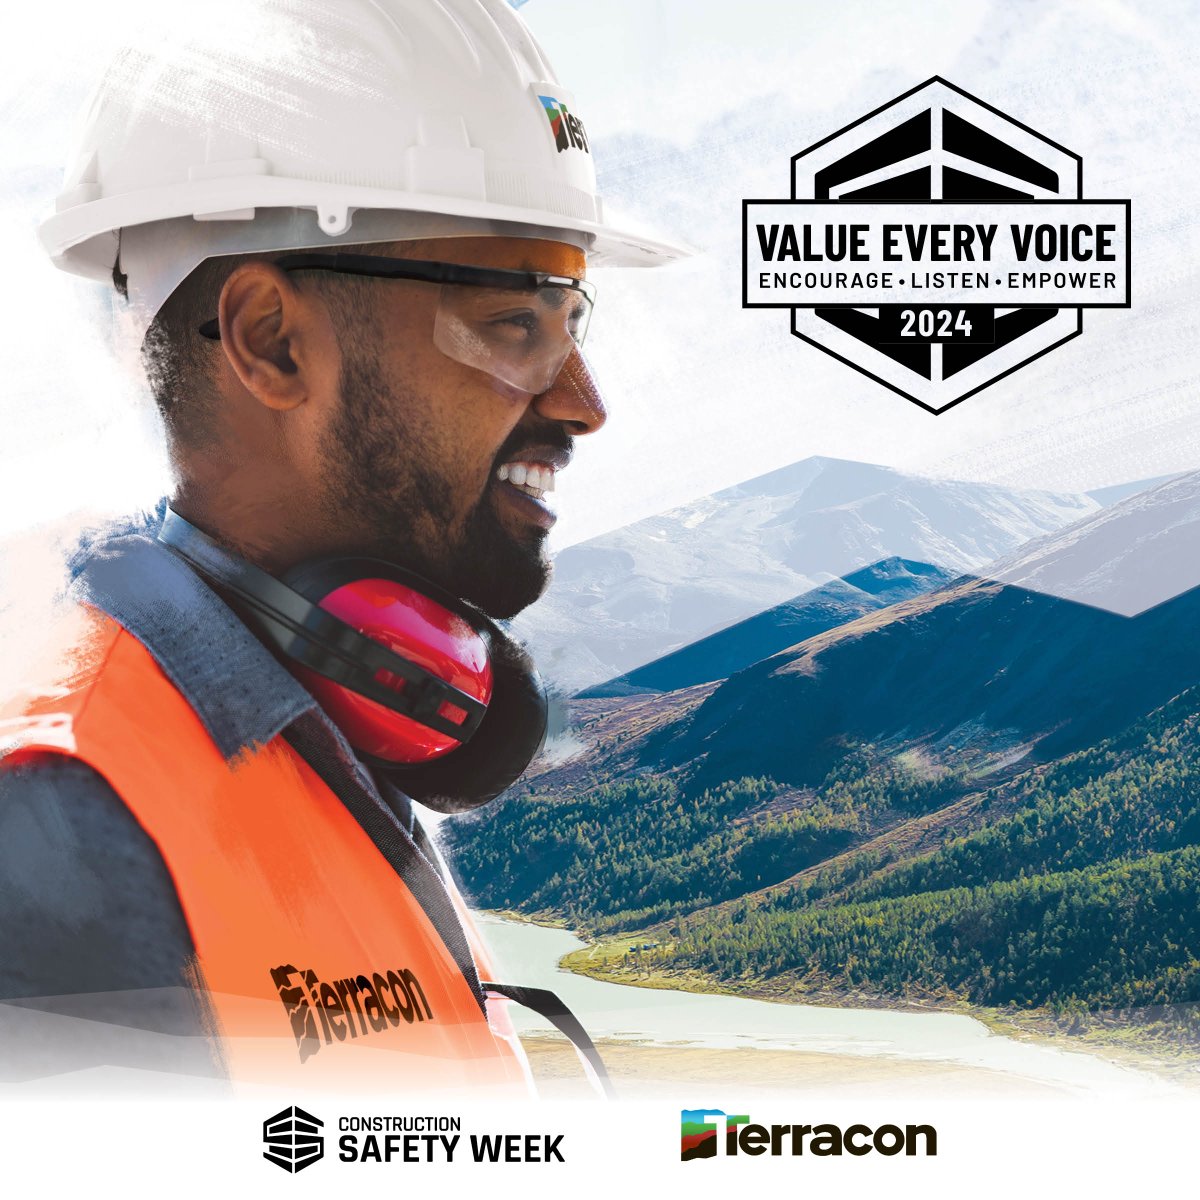 Staying safe starts with caring, including about coworkers’ wellbeing, both on and off the jobsite. Do you have a plan for looking after your and your coworkers’ mental health? go.terracon.com/3njeu2J #ConstructionSafetyWeek